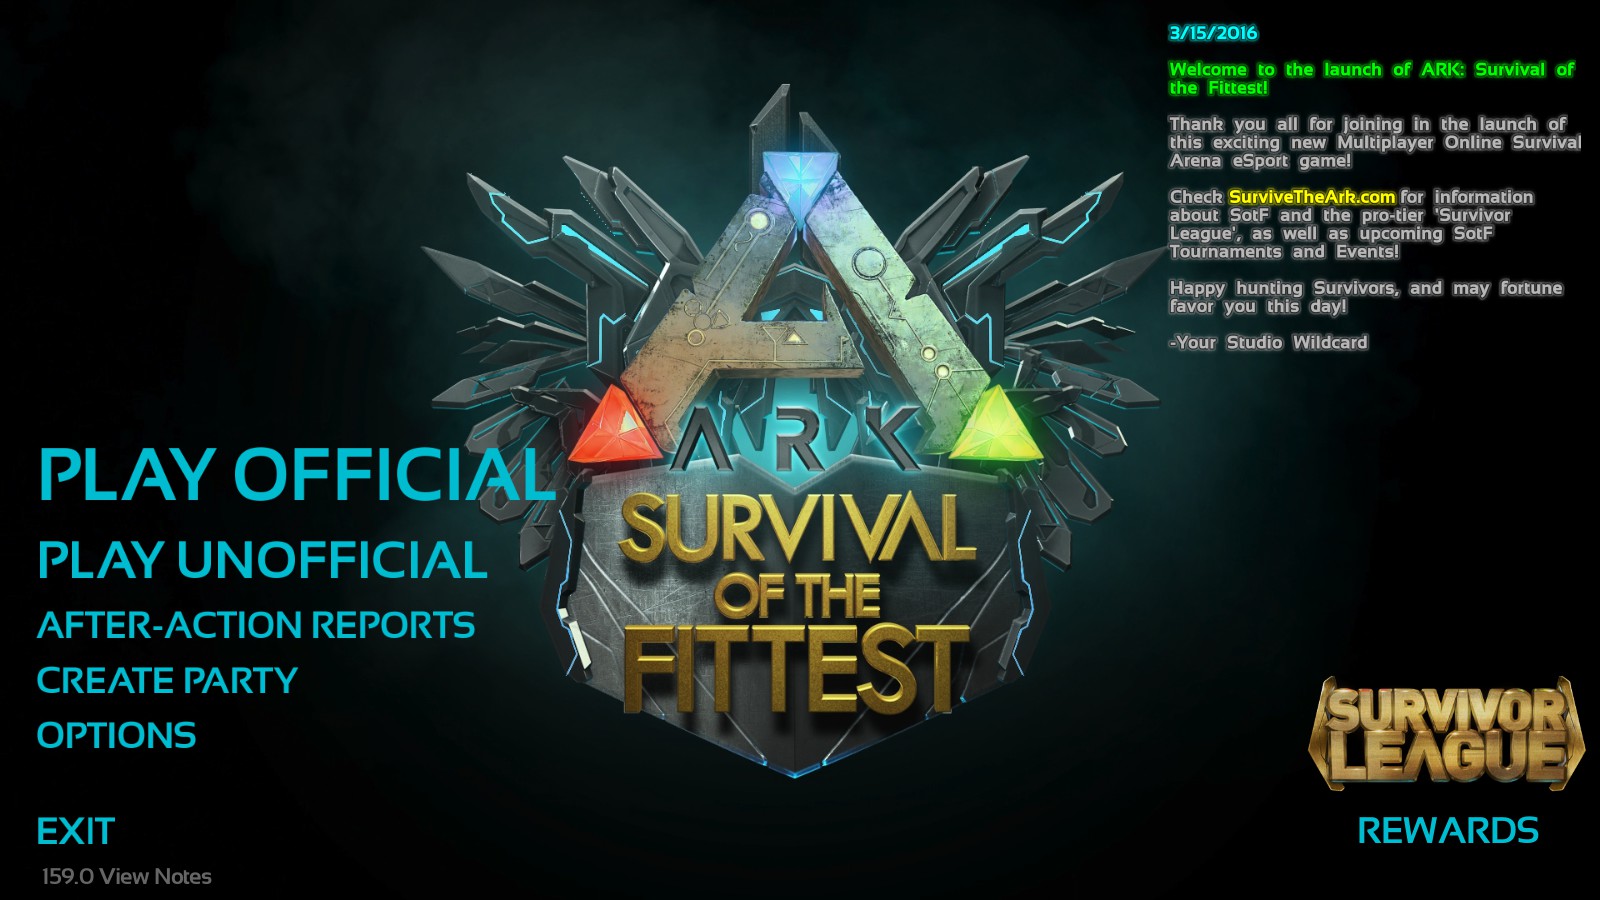 Ark of the Fittest. Wildcard игра. АРК фит. Survival of the Fittest. Ark launcher